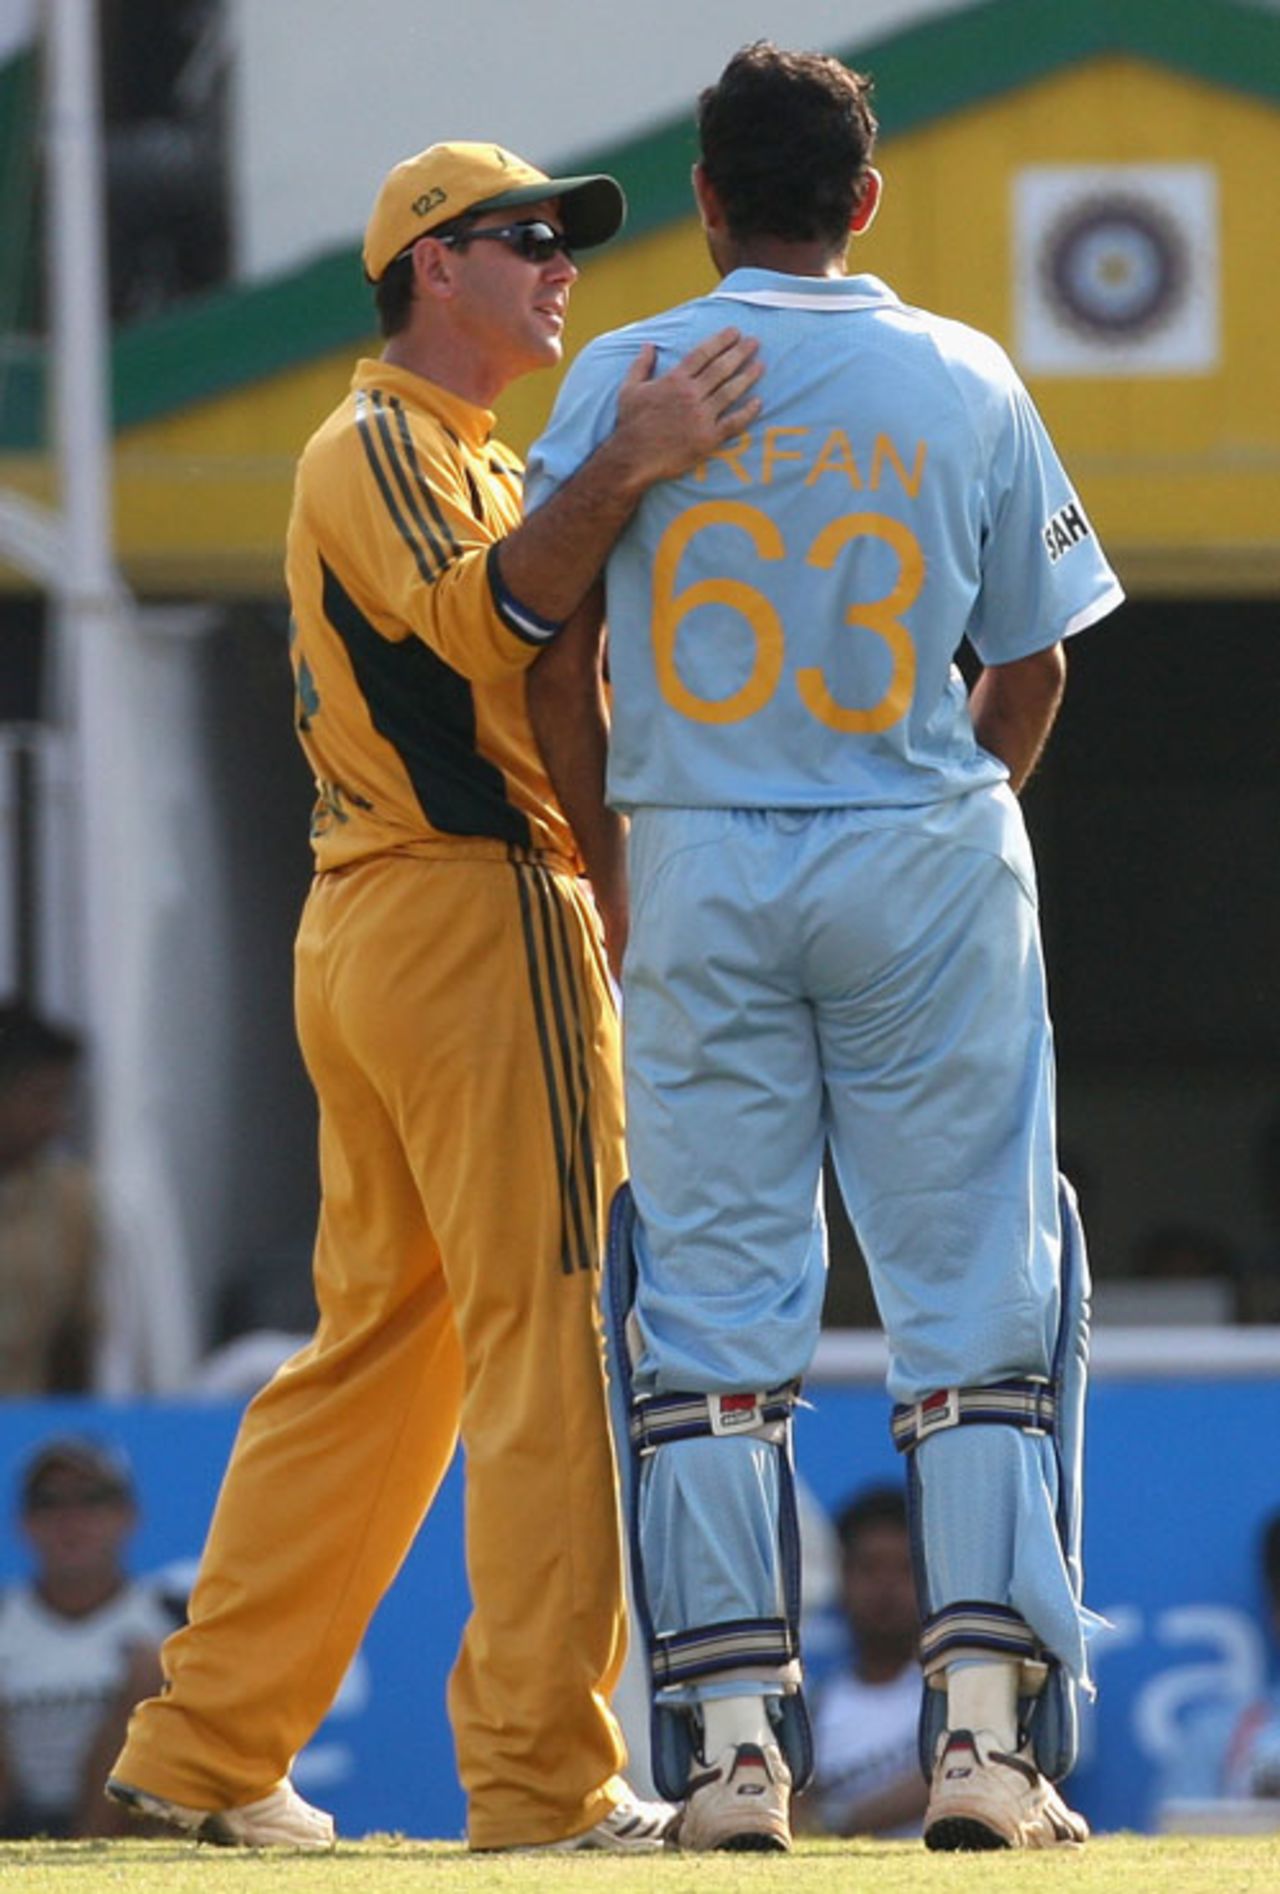 Ricky Ponting tries to calm Irfan Pathan after an altercation with Andrew Symonds, India v Australia, 6th ODI, Nagpur, October 14, 2007   



